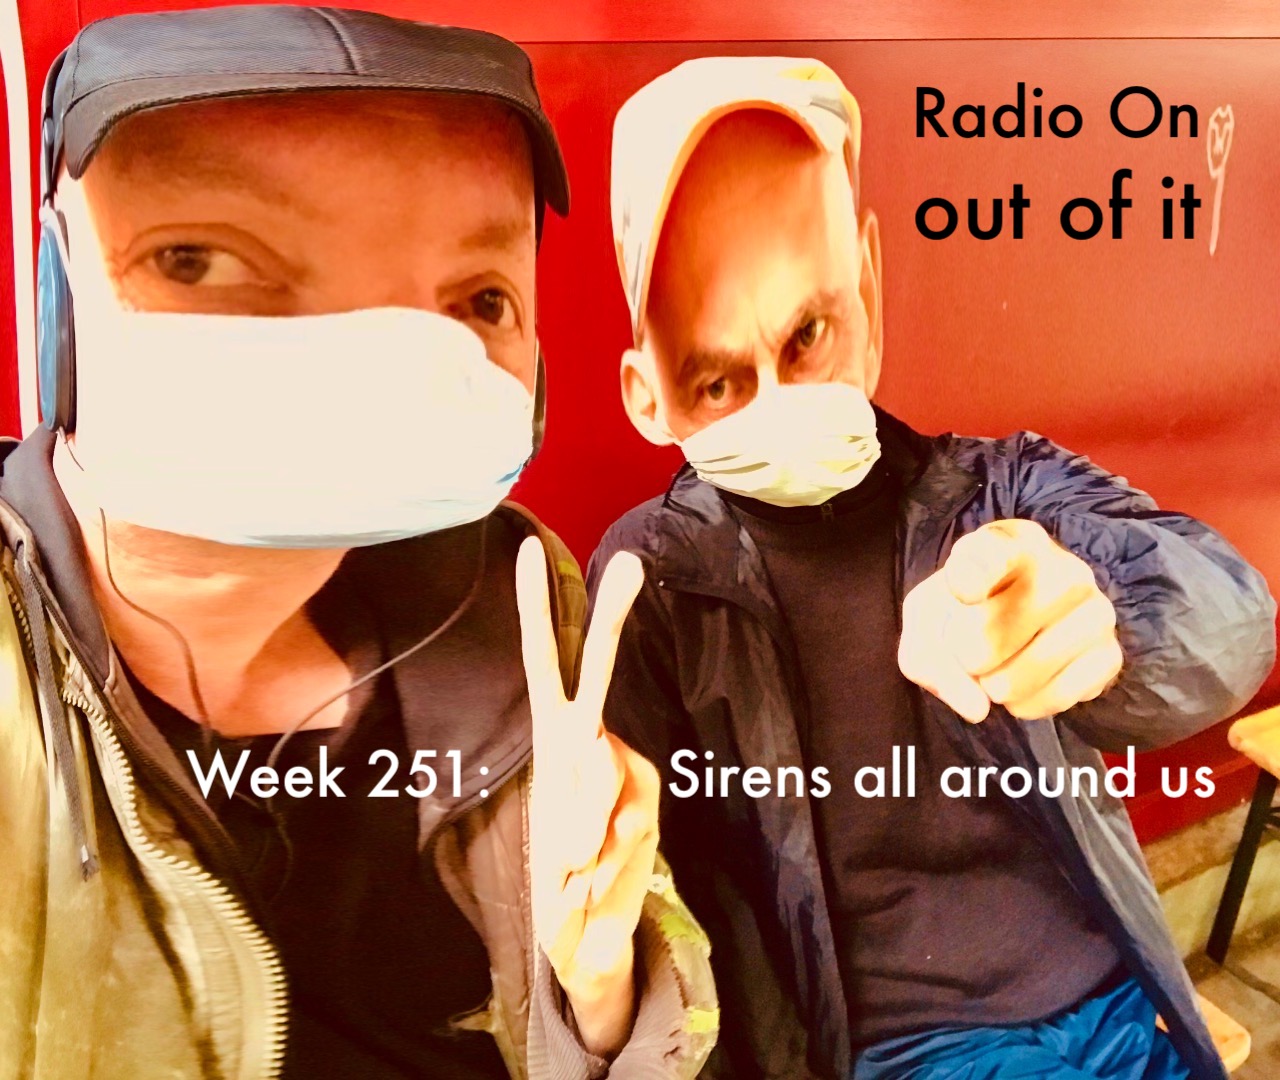 Radio On, out of it – week 251: Sirens all around us